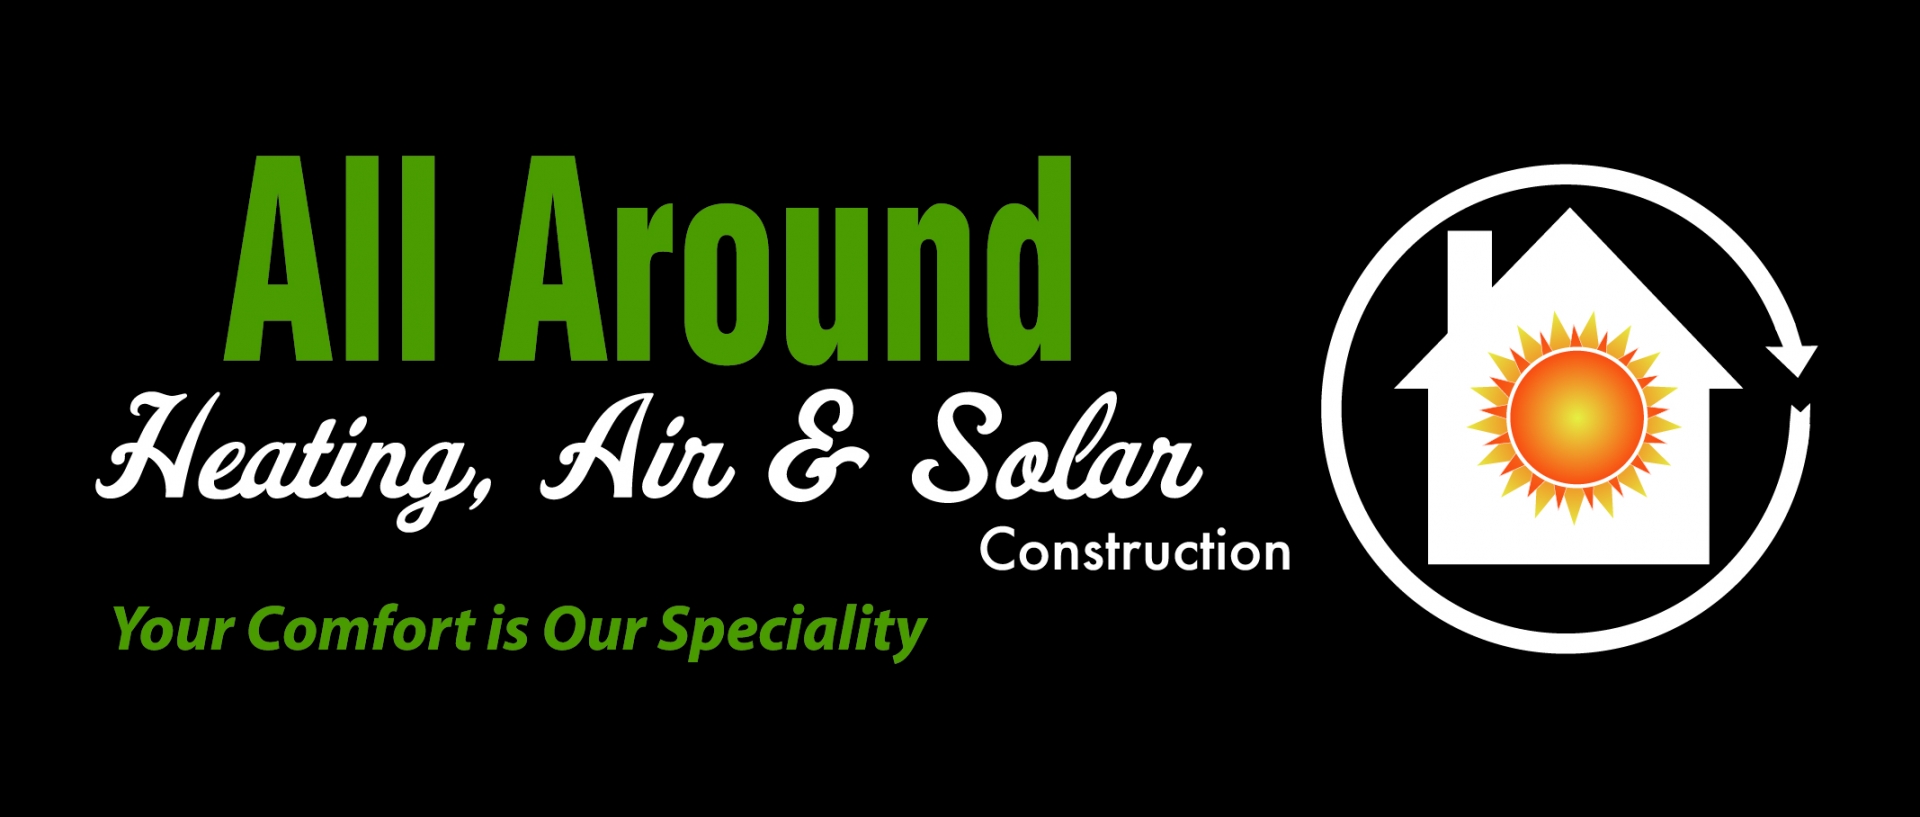 All Around Heating, Air and Solar Construction logo